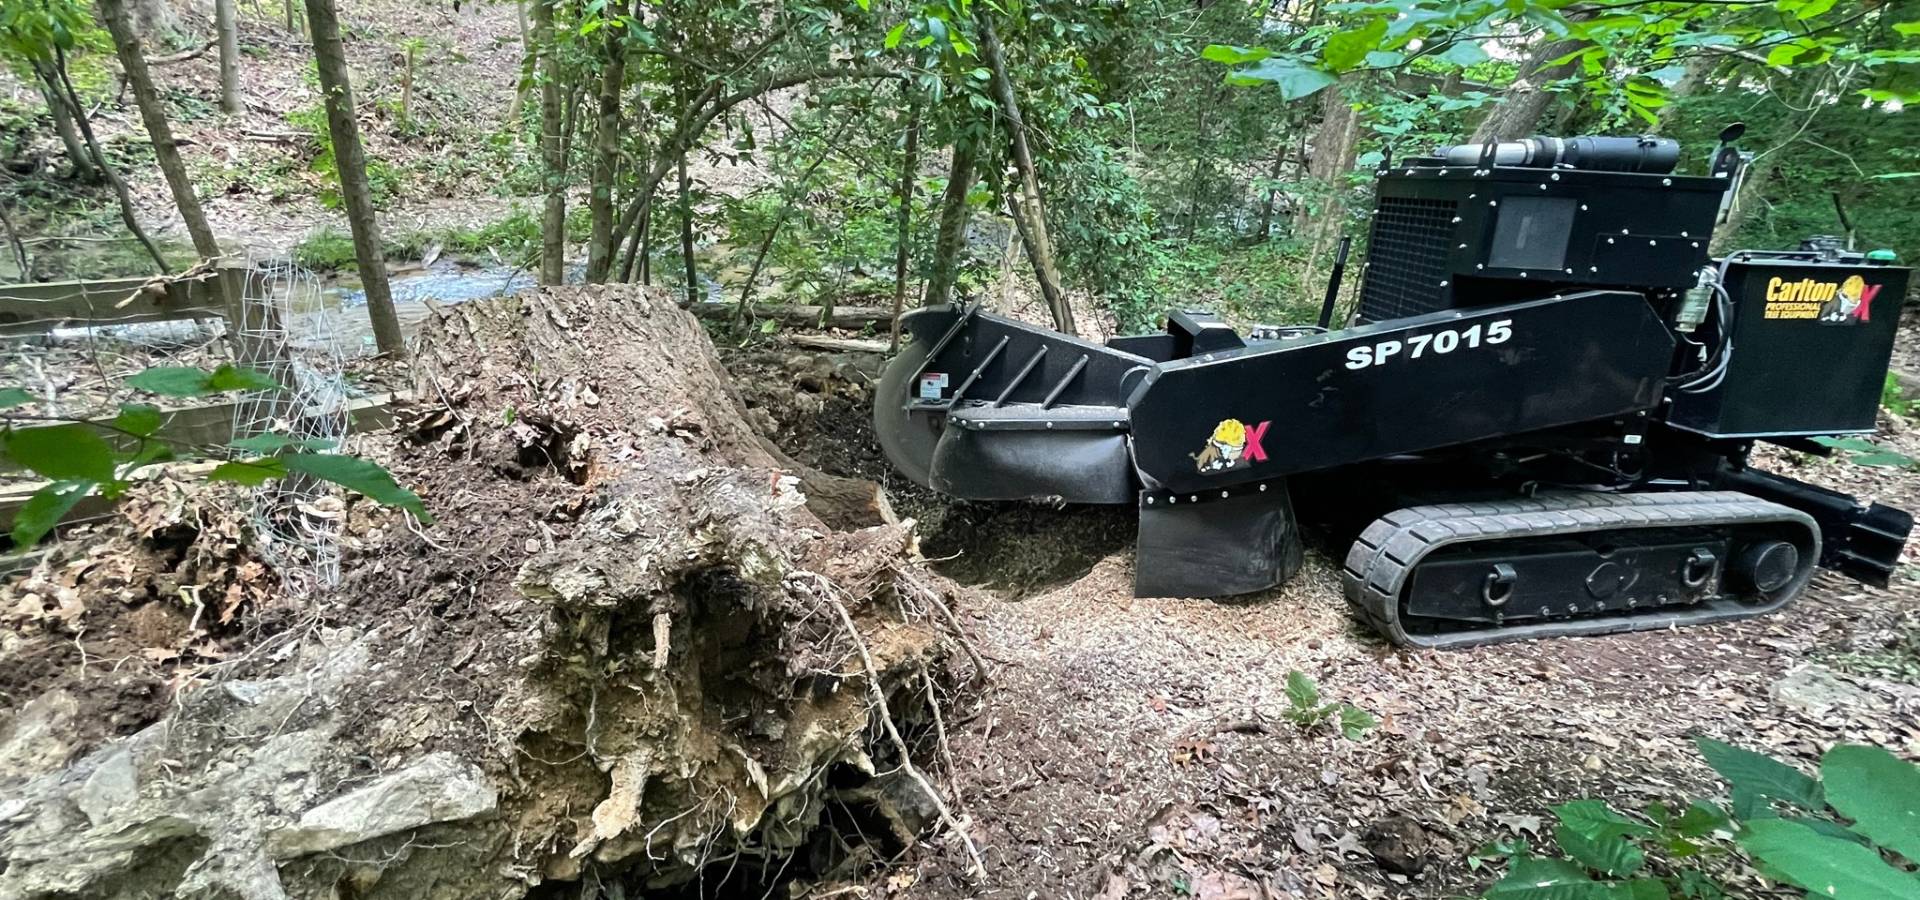 The black ZZ Tree stump grinder sitting a stump in a wooded area.